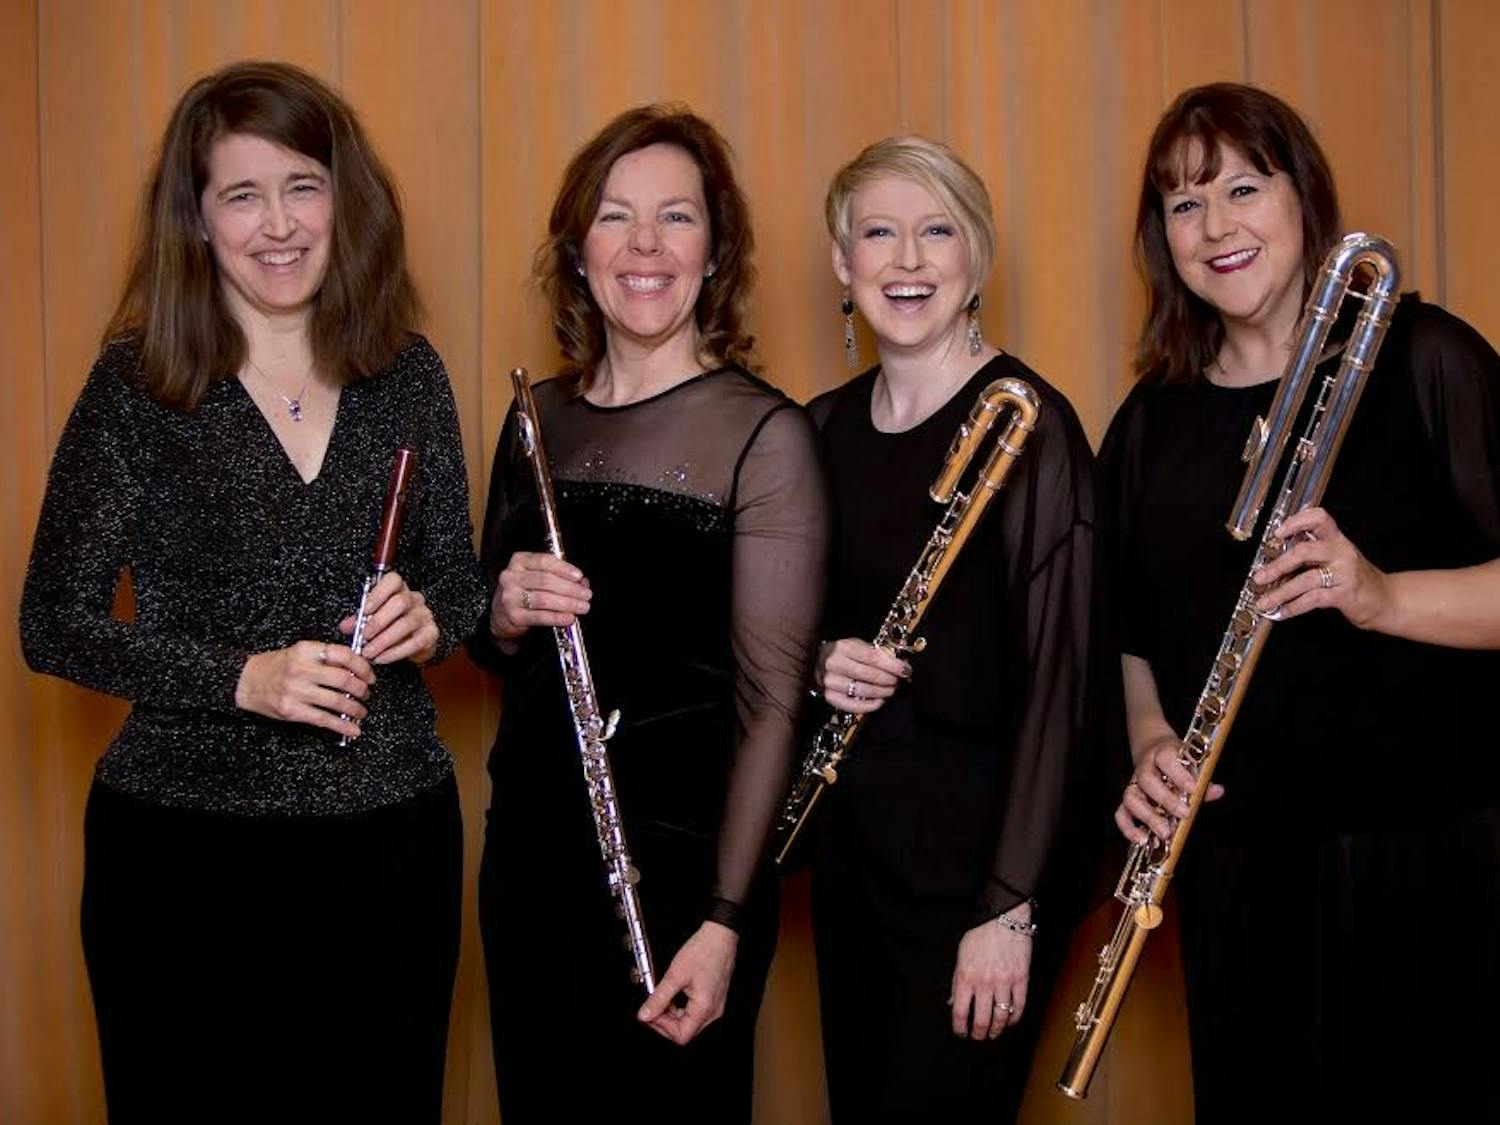 : PANdemonium 4, a flute quartet comprised of professors from different universities, will make its debut performance on Monday. Provided via&nbsp;Erika Flugge Photography.&nbsp;